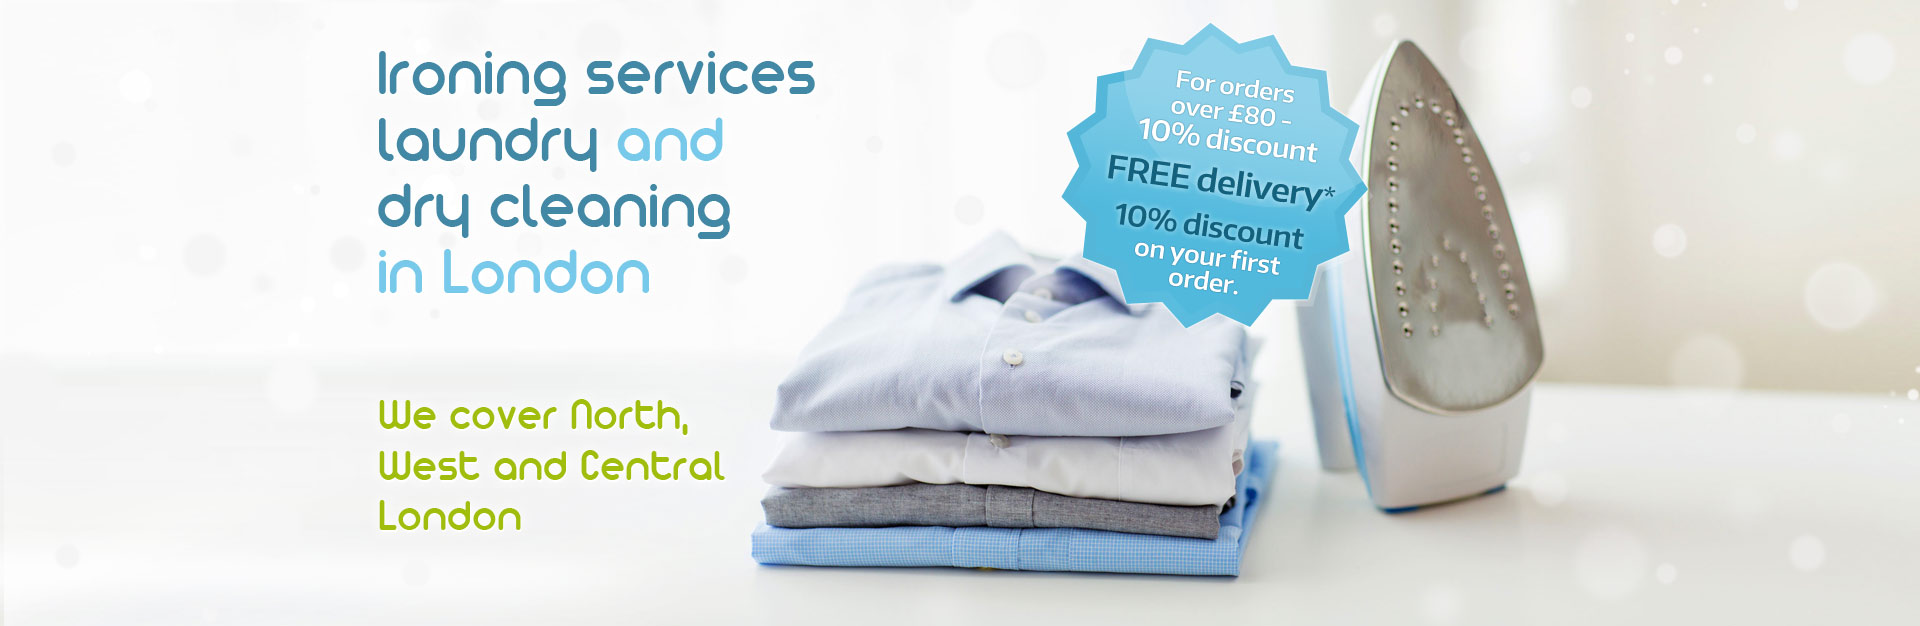 Goironing | 07703 844 462 | Local Ironing Service in North, West and Central London